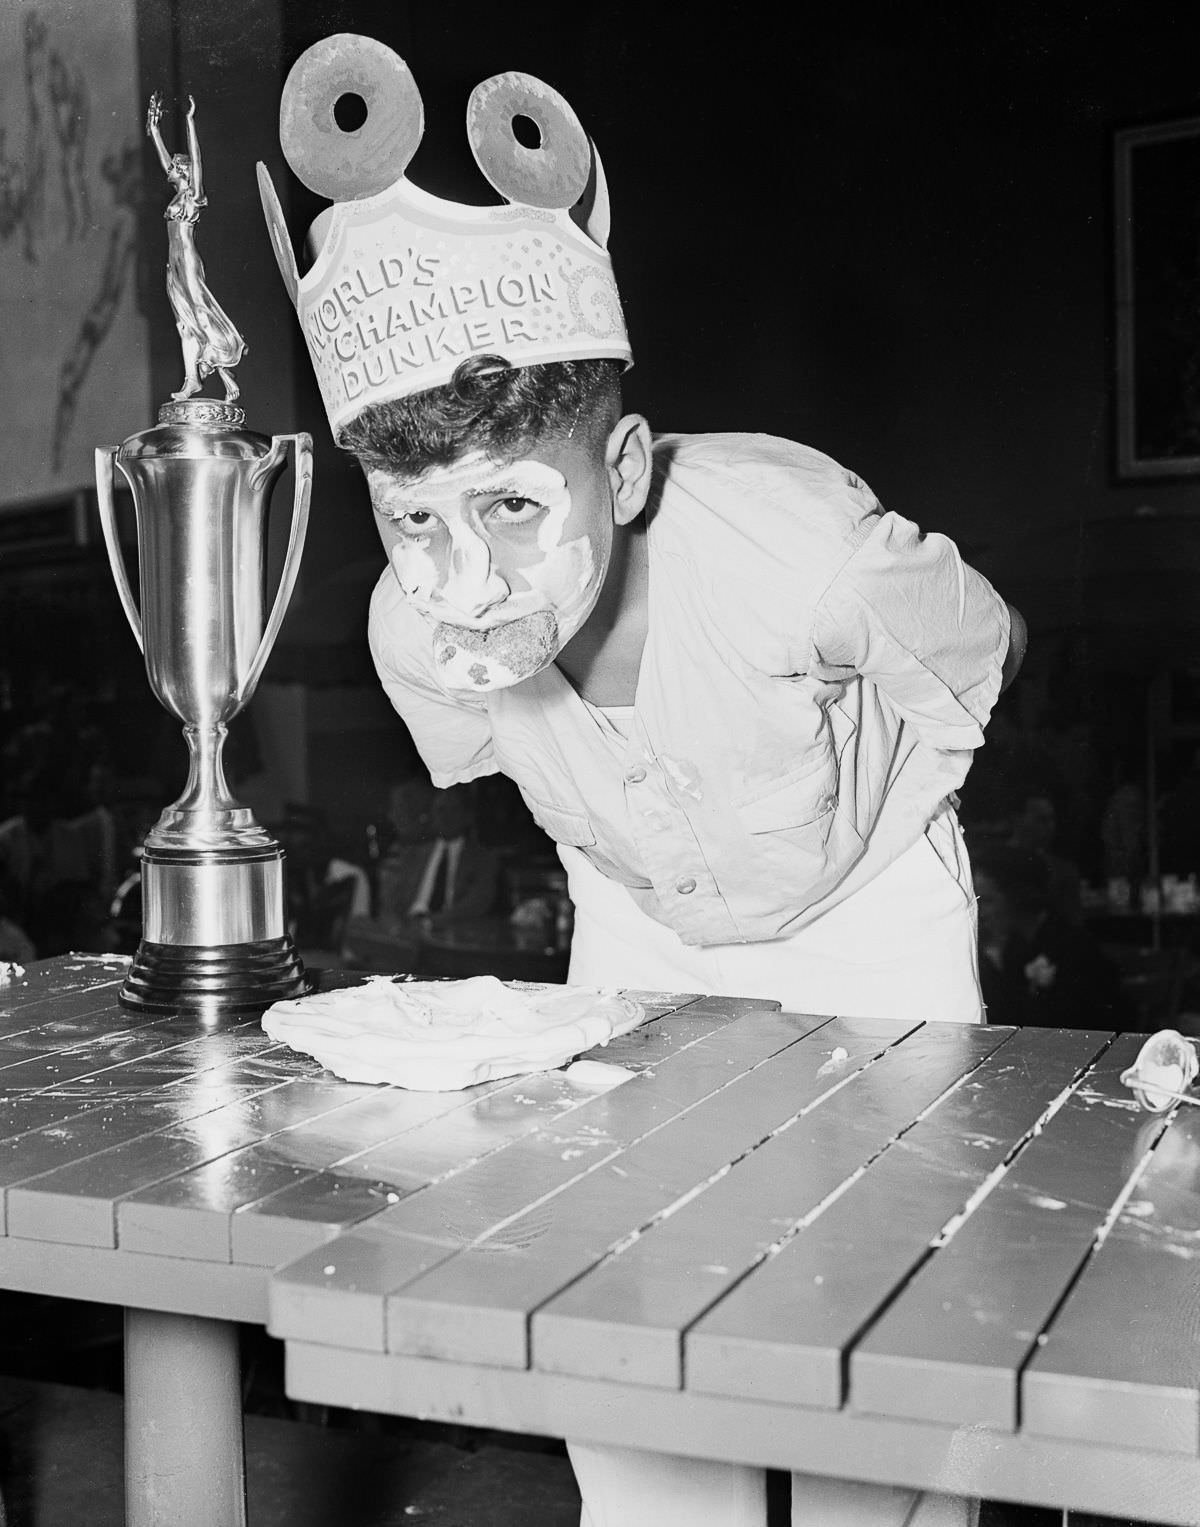 Joseph Rubolotta, 12, is crowned world champion doughnut dunker at a competition in New York, 1939.